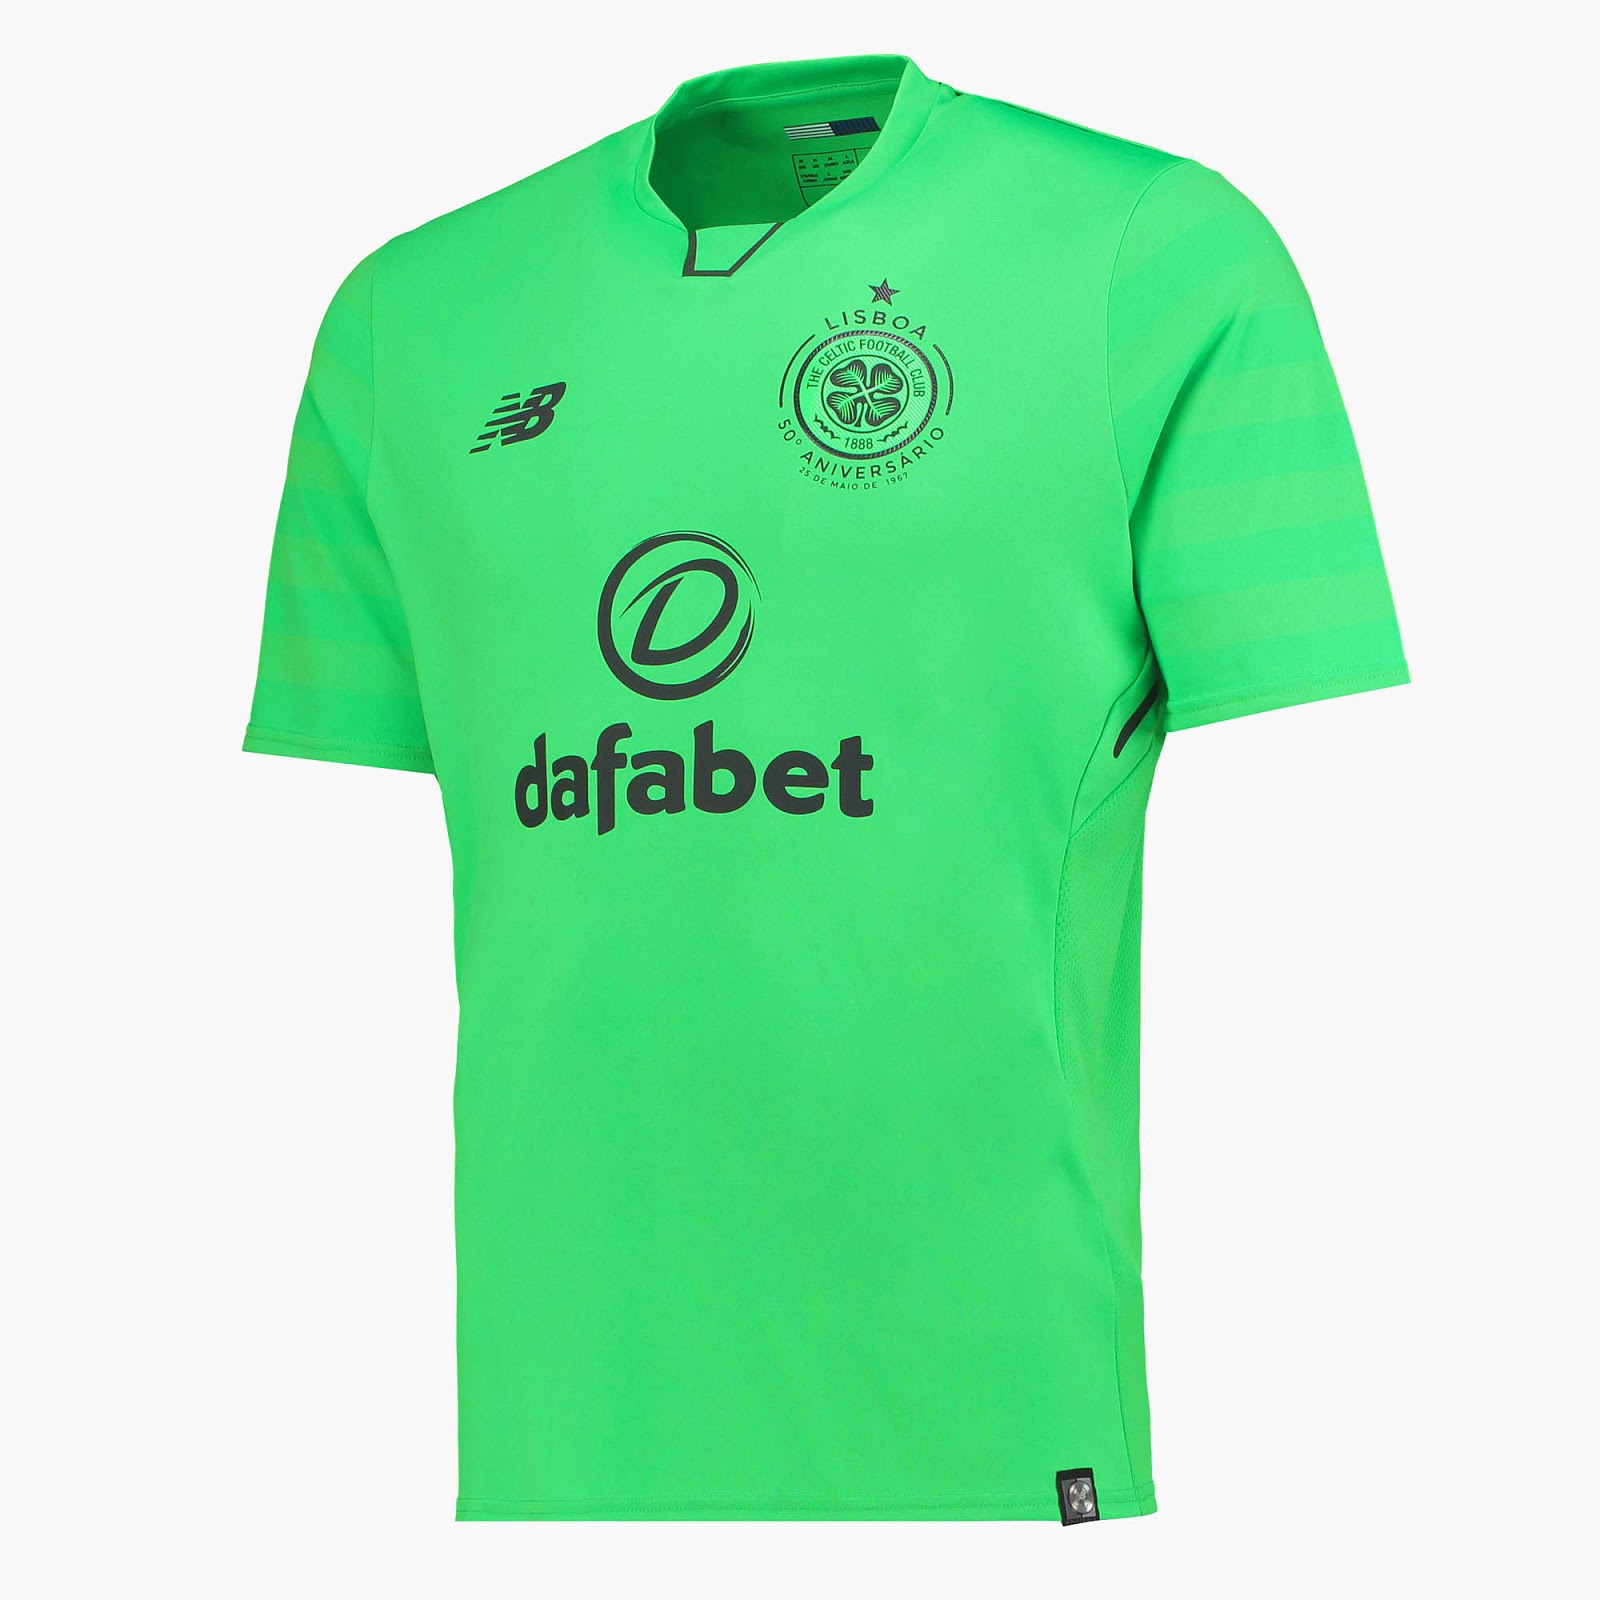 2017/18 kit out now and available exclusively from Celtic